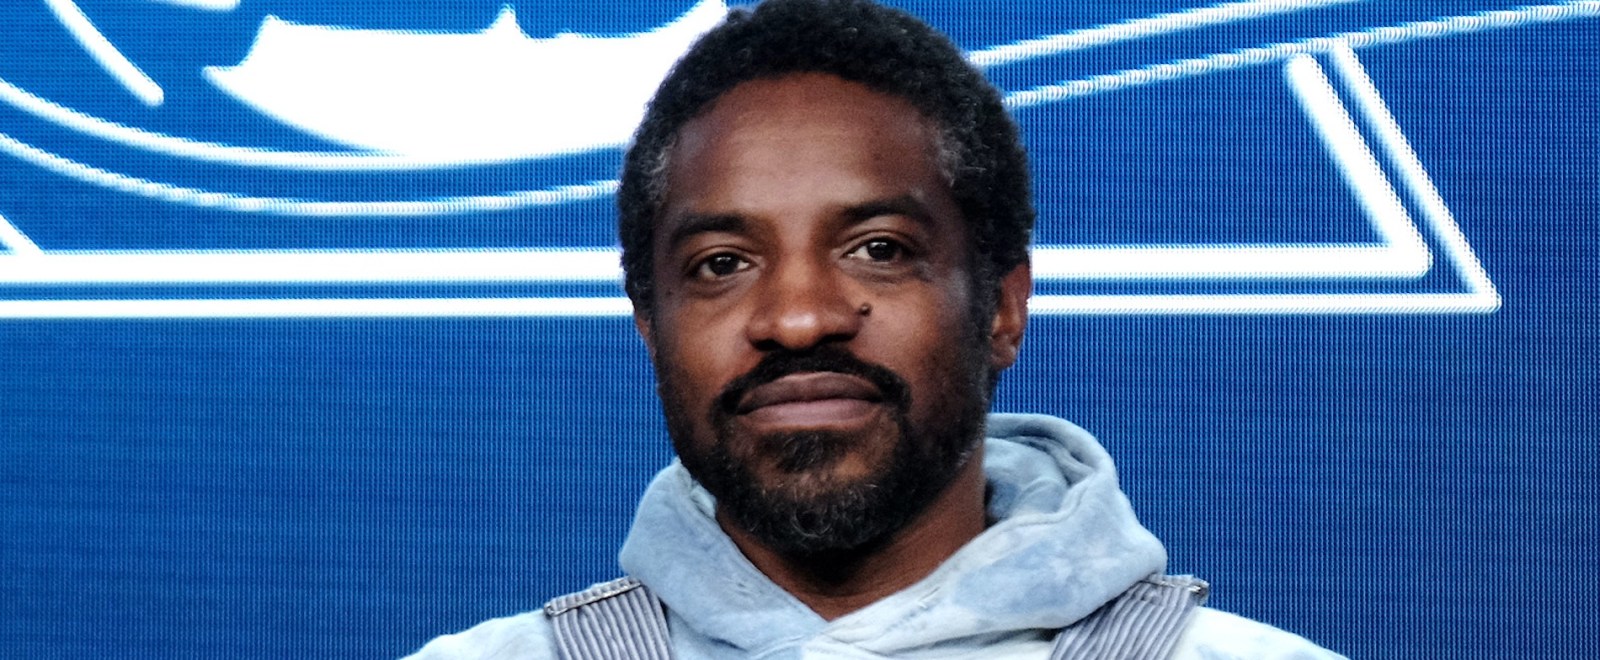 Outkast's André 3000 joins the cast of Netflix's upcoming 'White